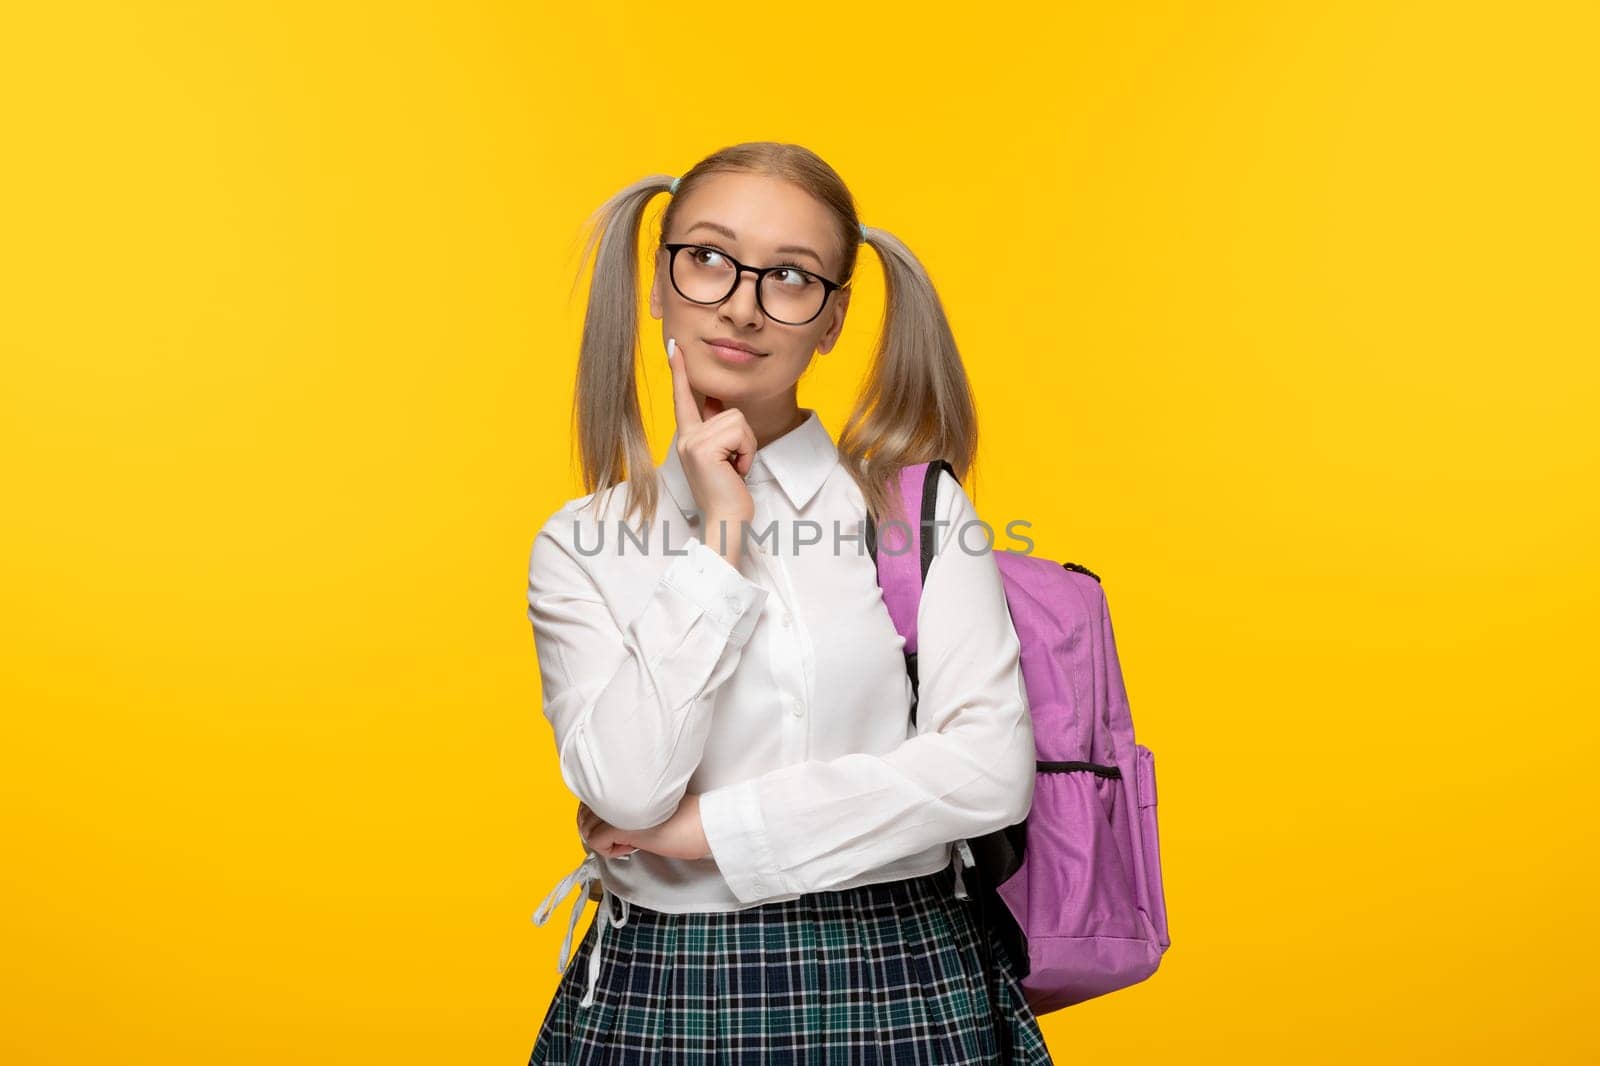 world book day thinking schoolgirl in glasses and pink backpack on yellow background by Kamran